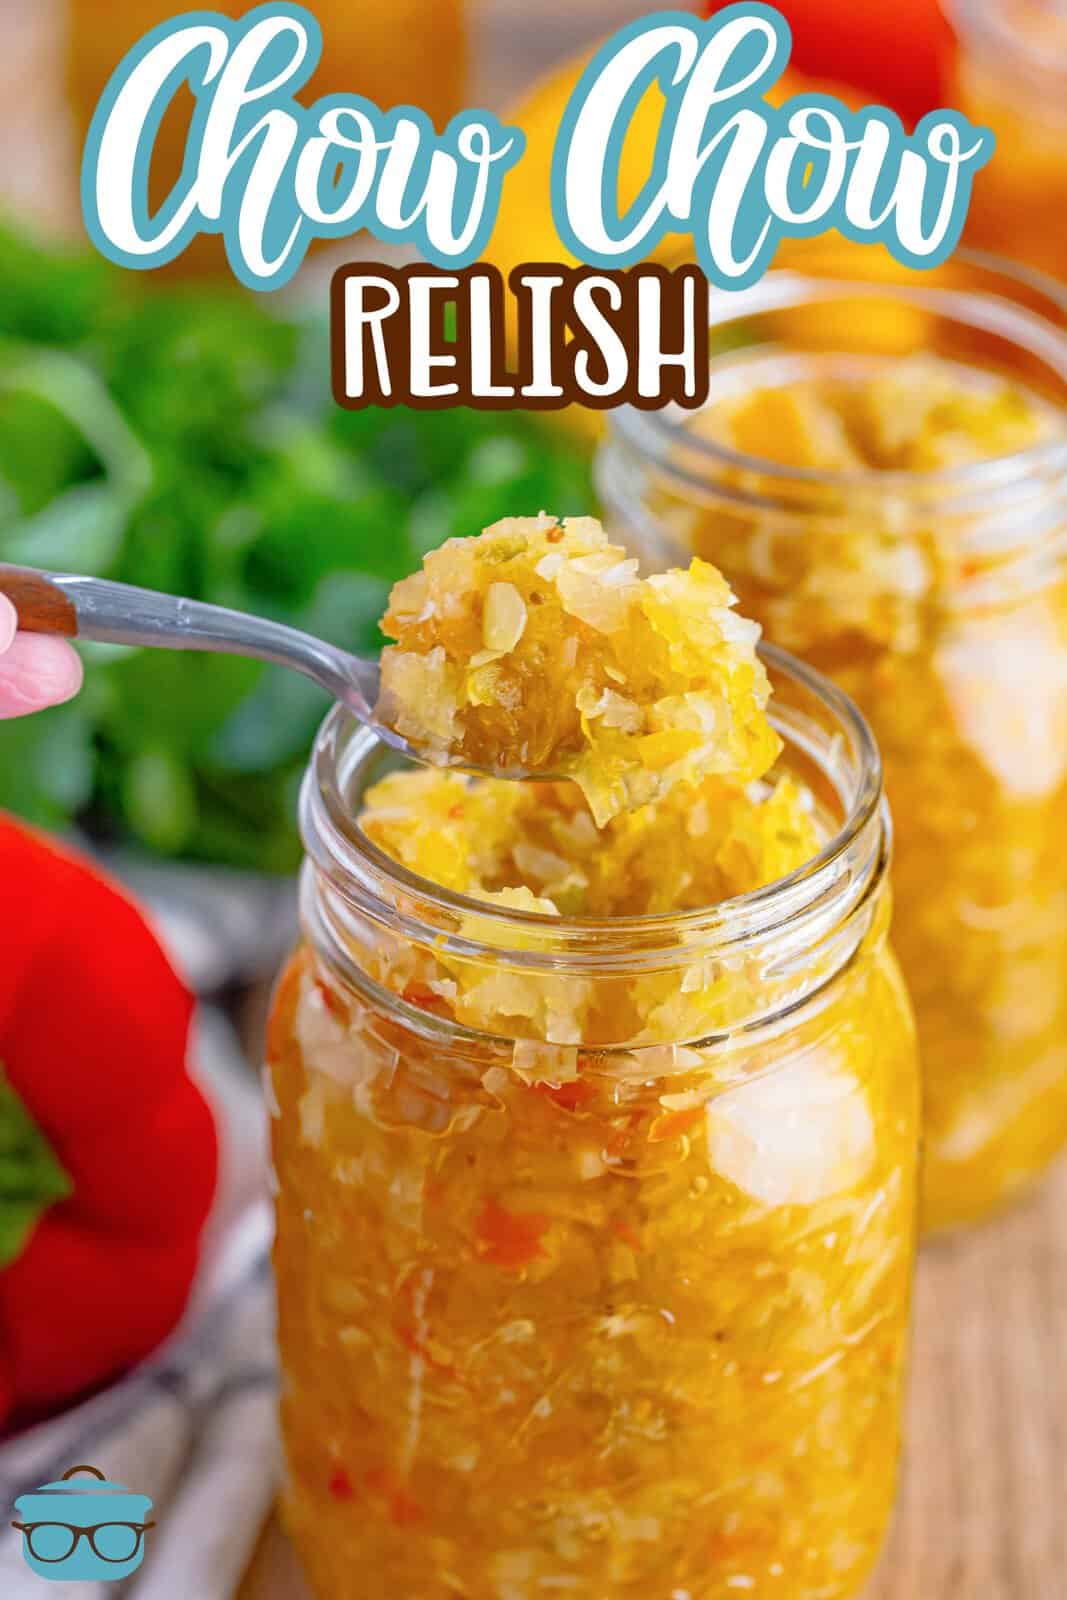 A spoon scooping out some Chow Chow Relish from a Mason jar.